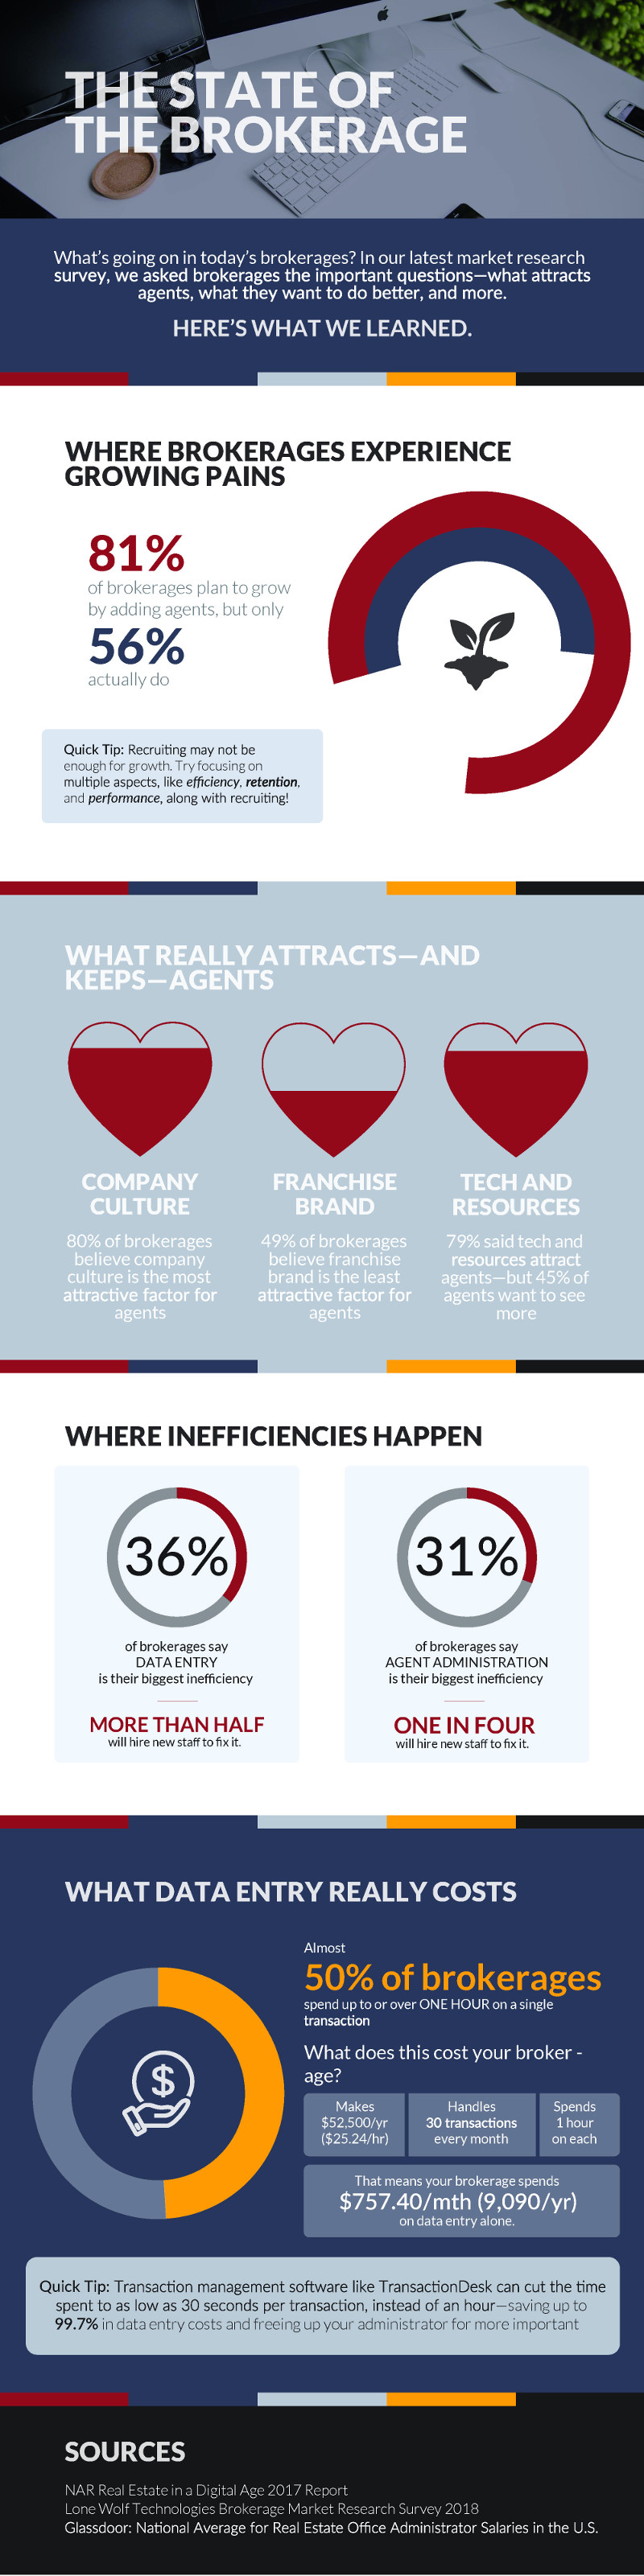 lwolf whats going todays real estate brokerages infographic